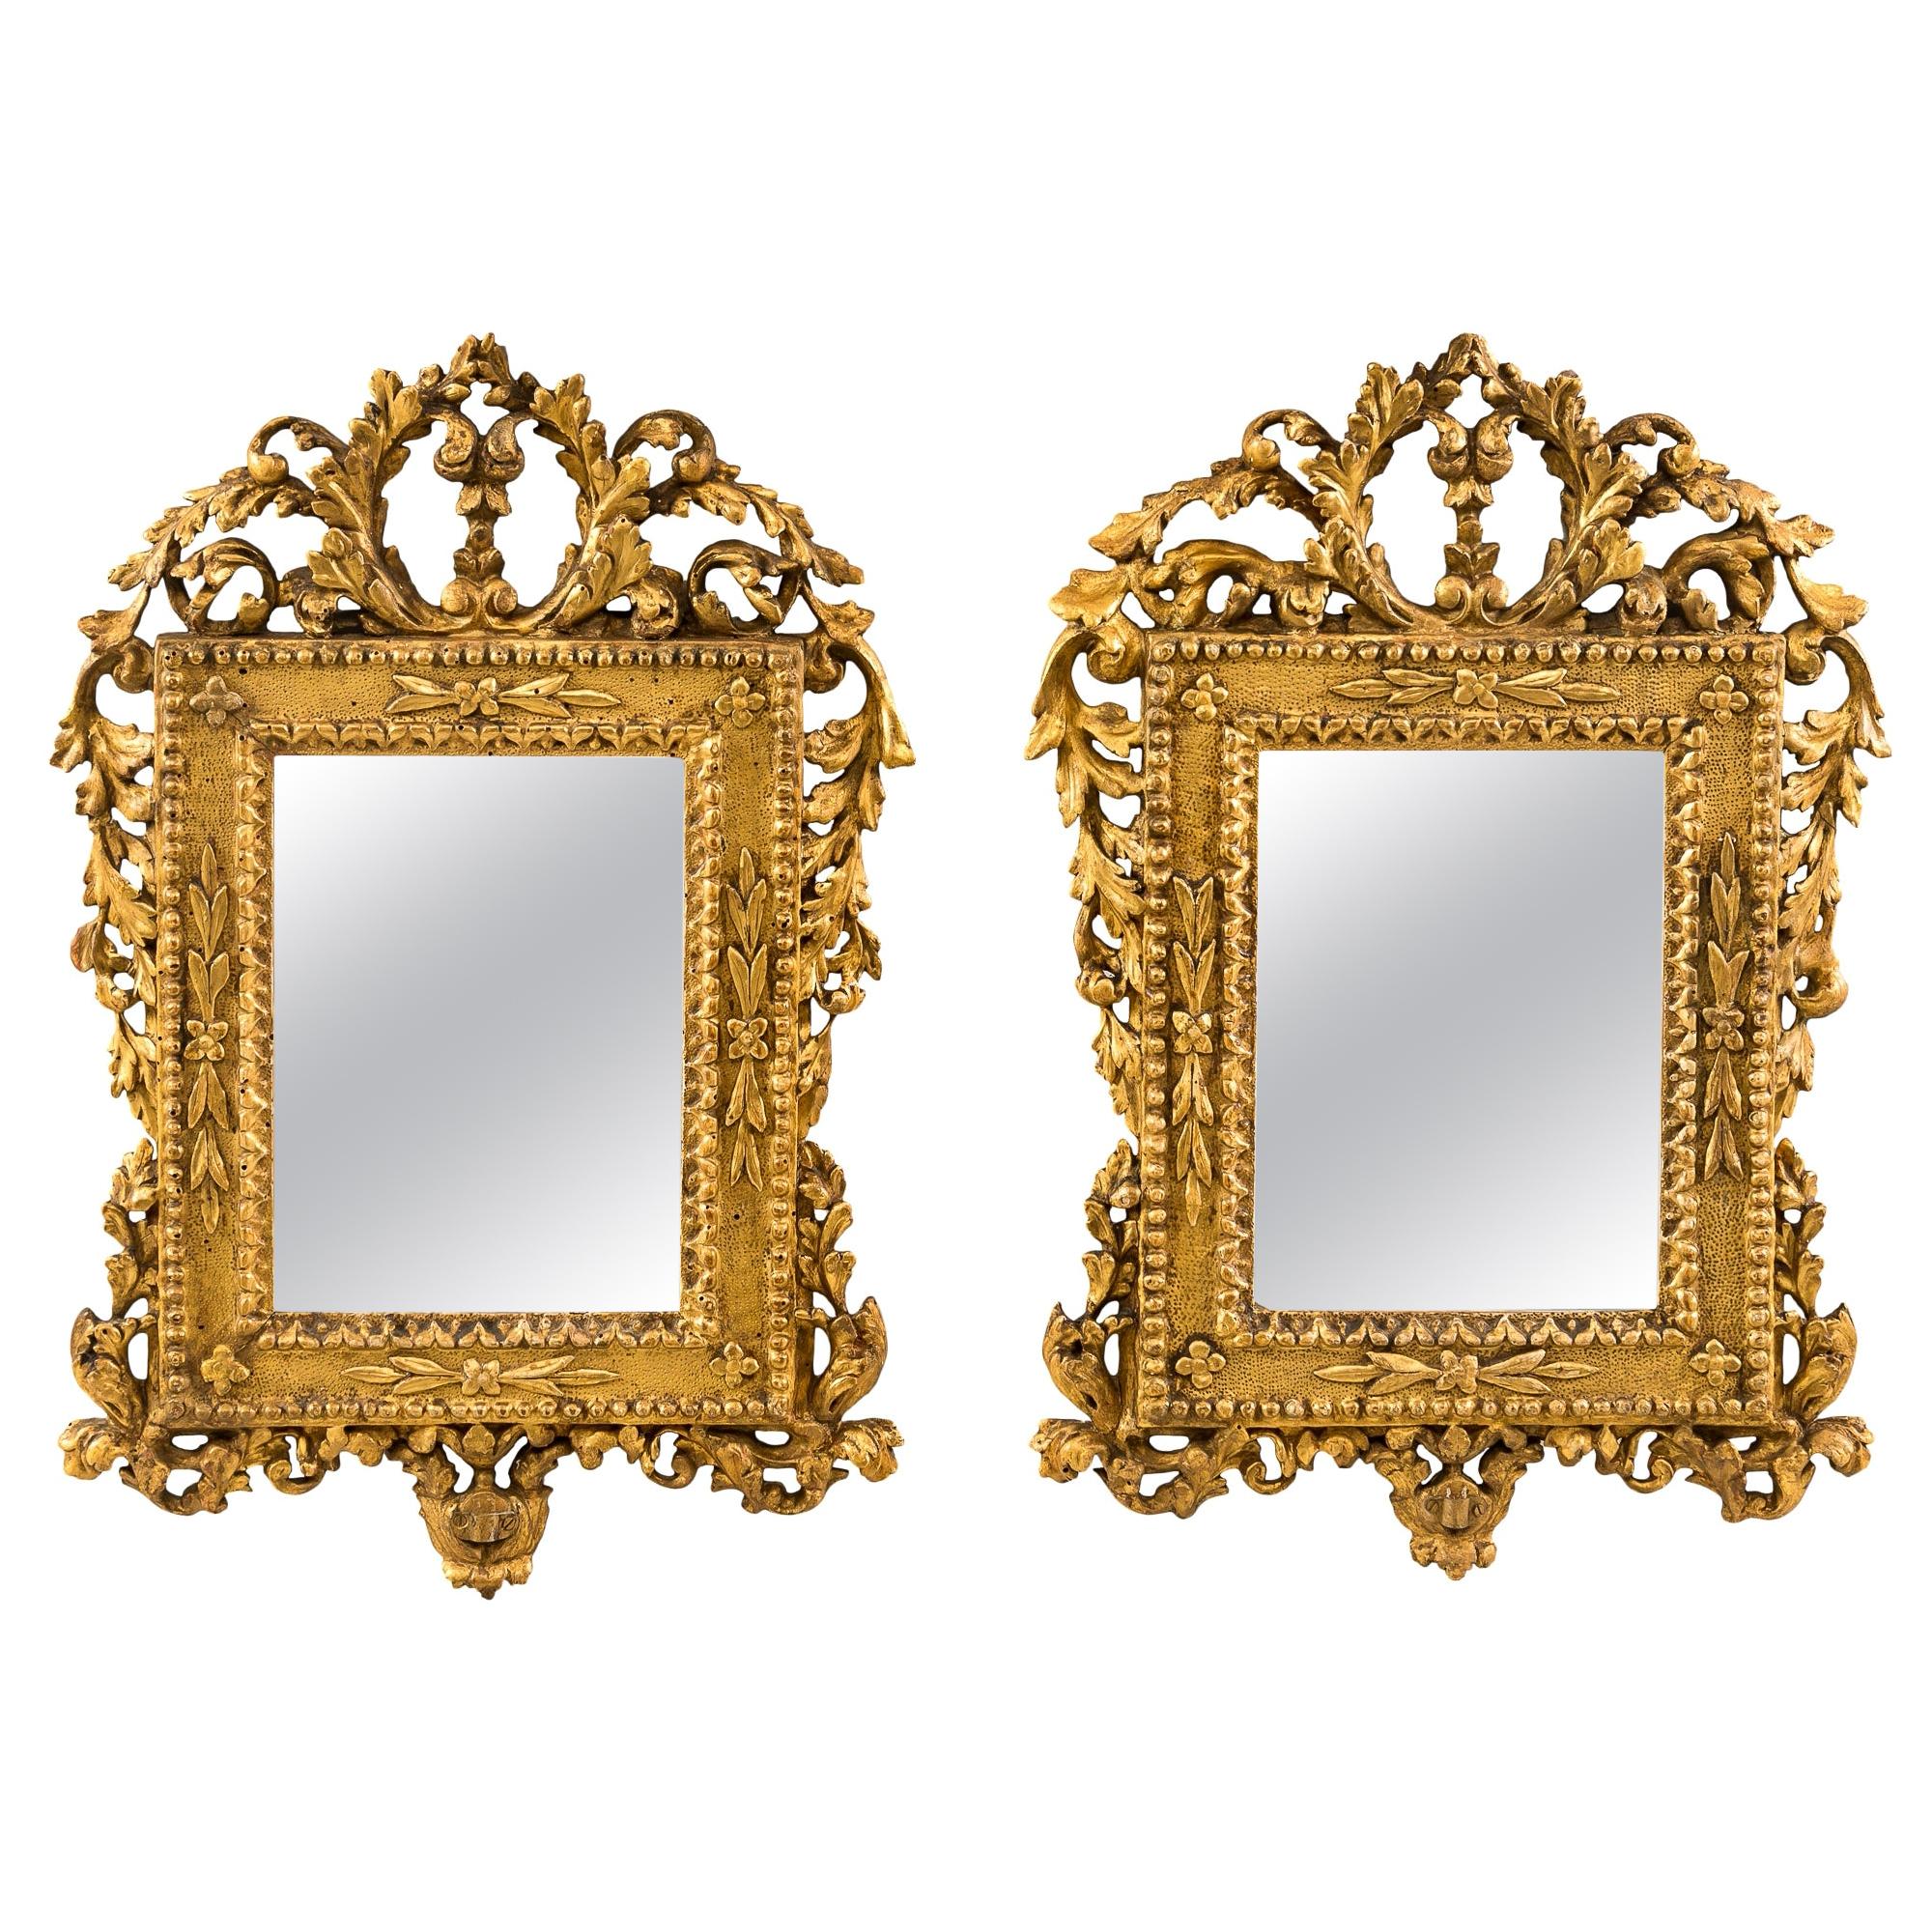 Pair of Italian Carved Gilded Mirrors, Italy, 18th Century, Rome Venice Glass